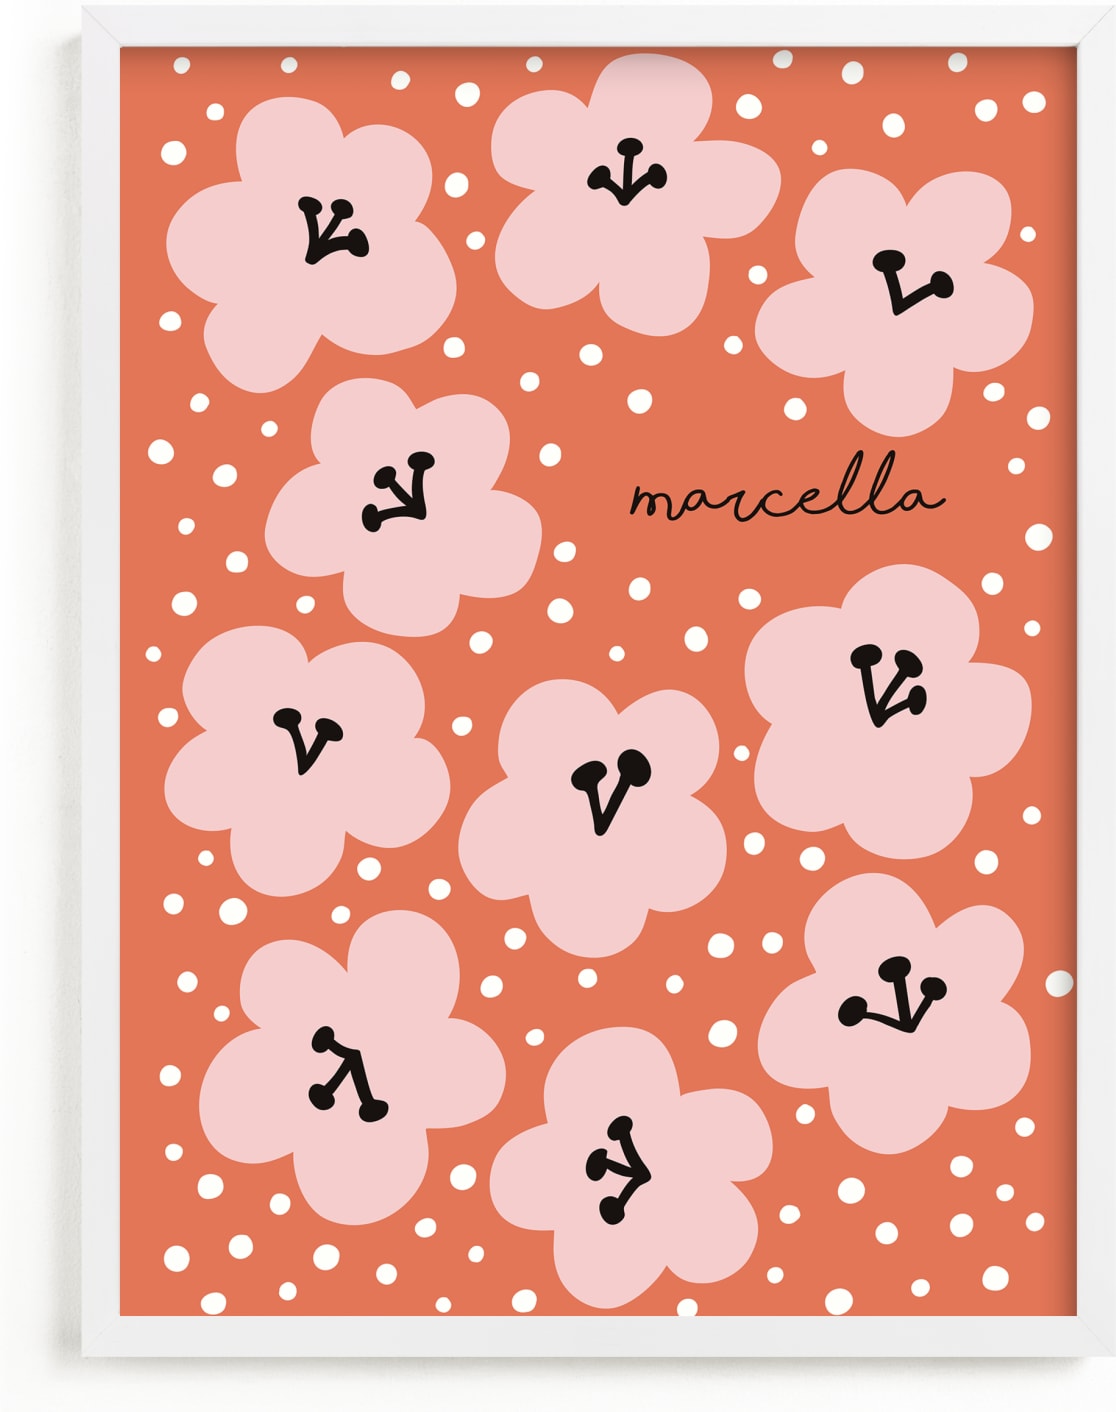 This is a pink personalized art for kid by Nieves Herranz called Marcella.